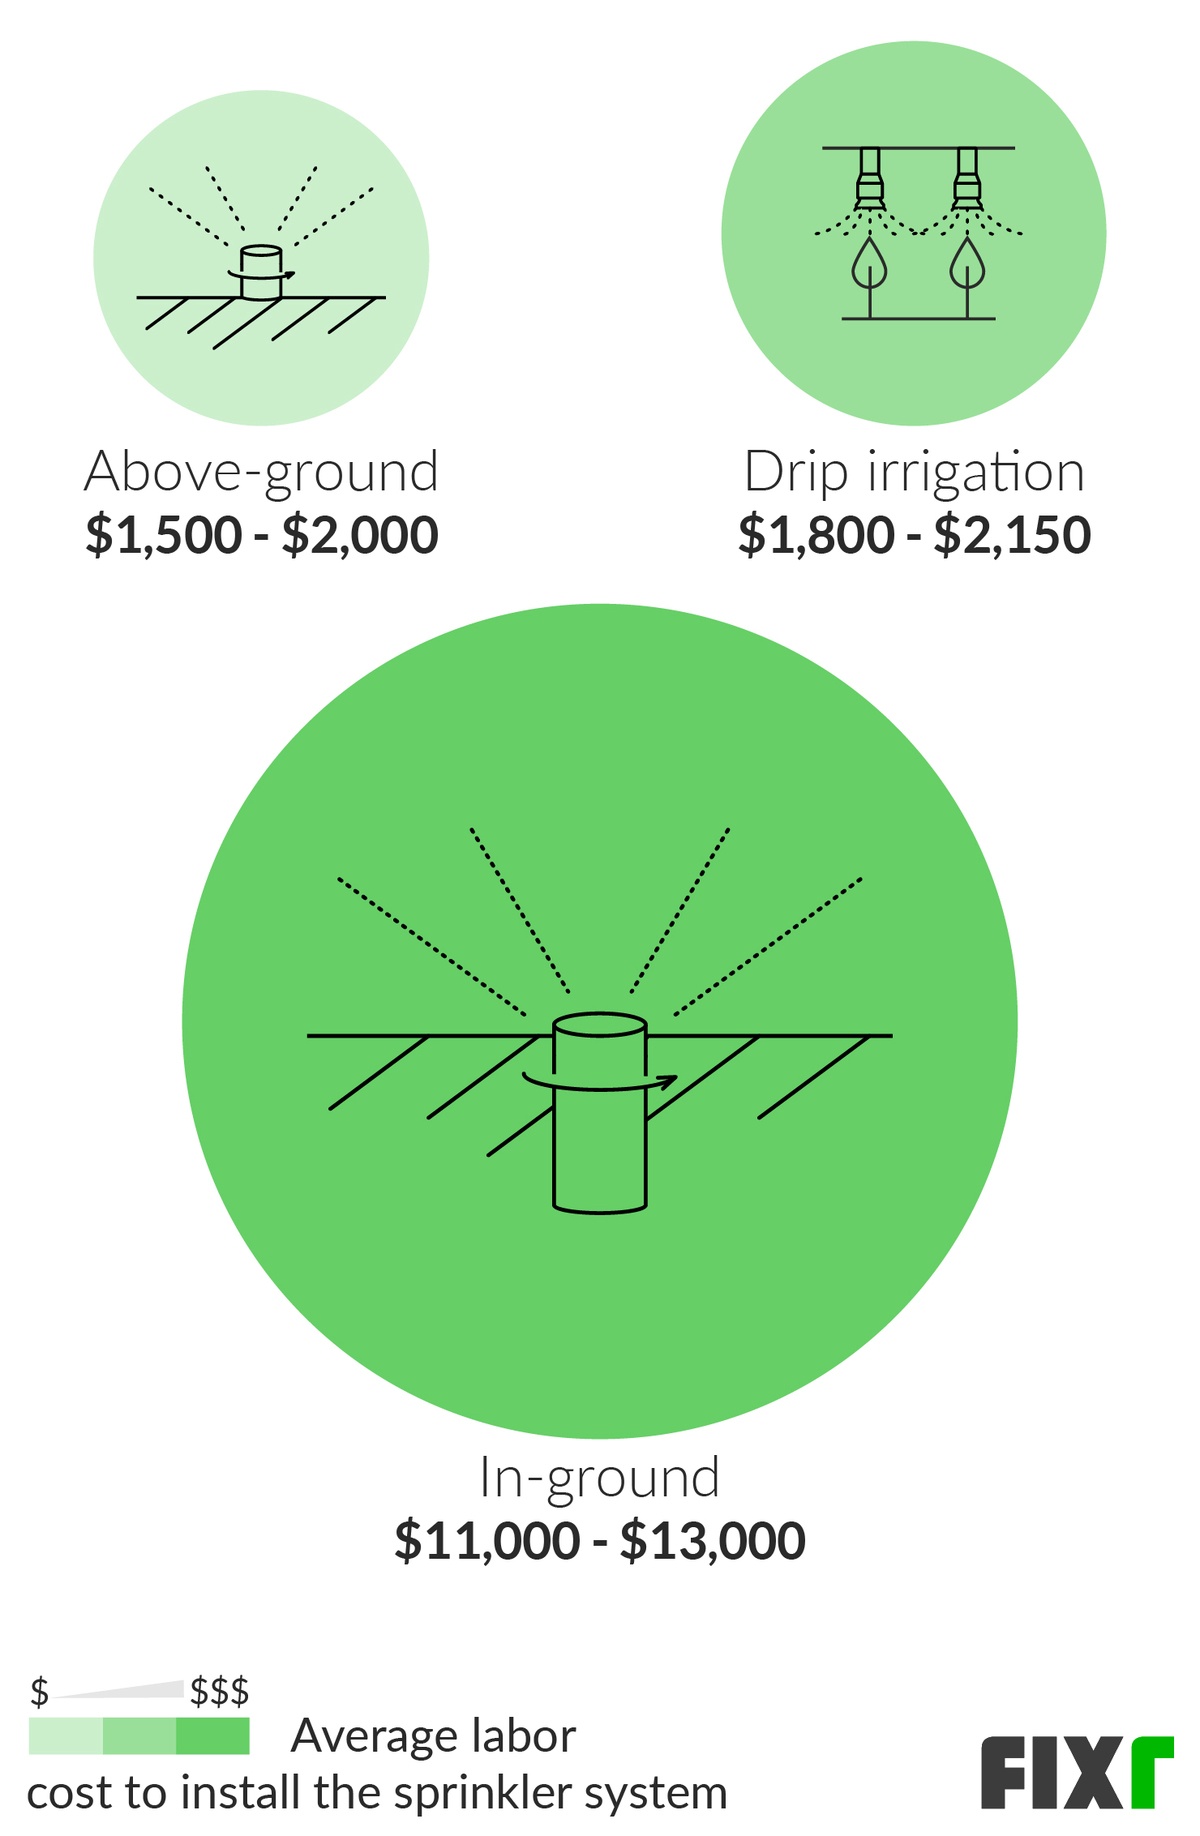 Sprinkler System Installation Cost, How Much Does It Cost To Put In An Inground Sprinkler System